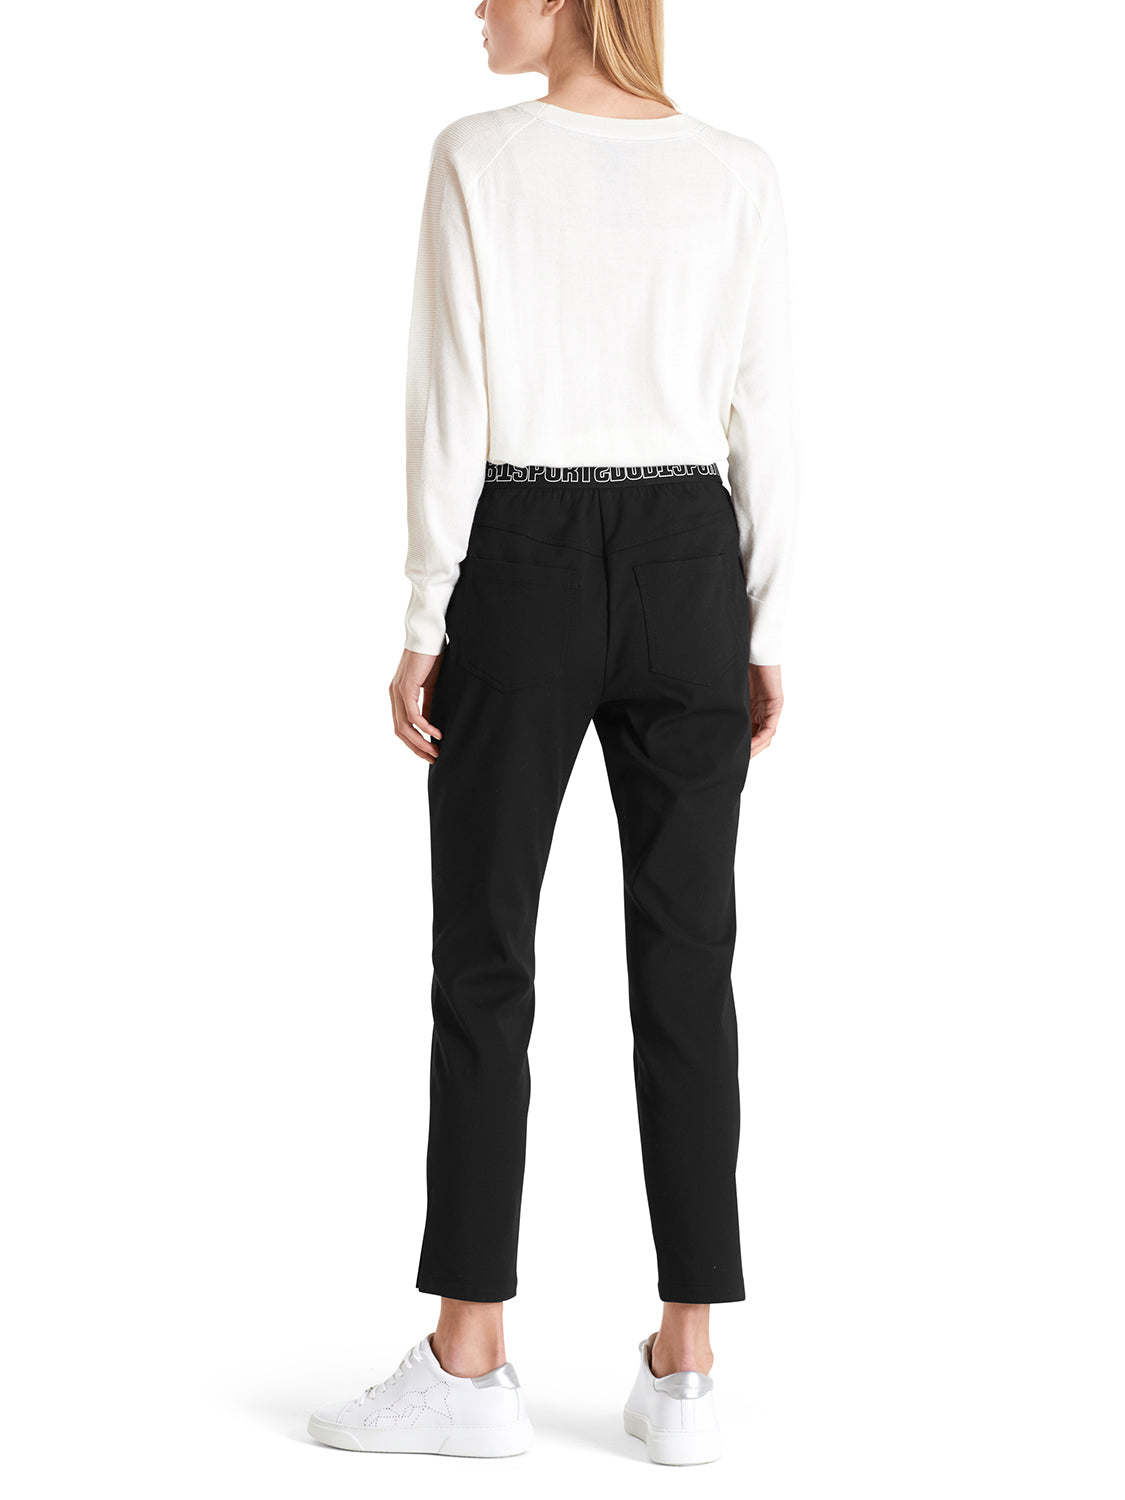 MarcCain "Rethink Together" Wide Leg Pant US8104W08